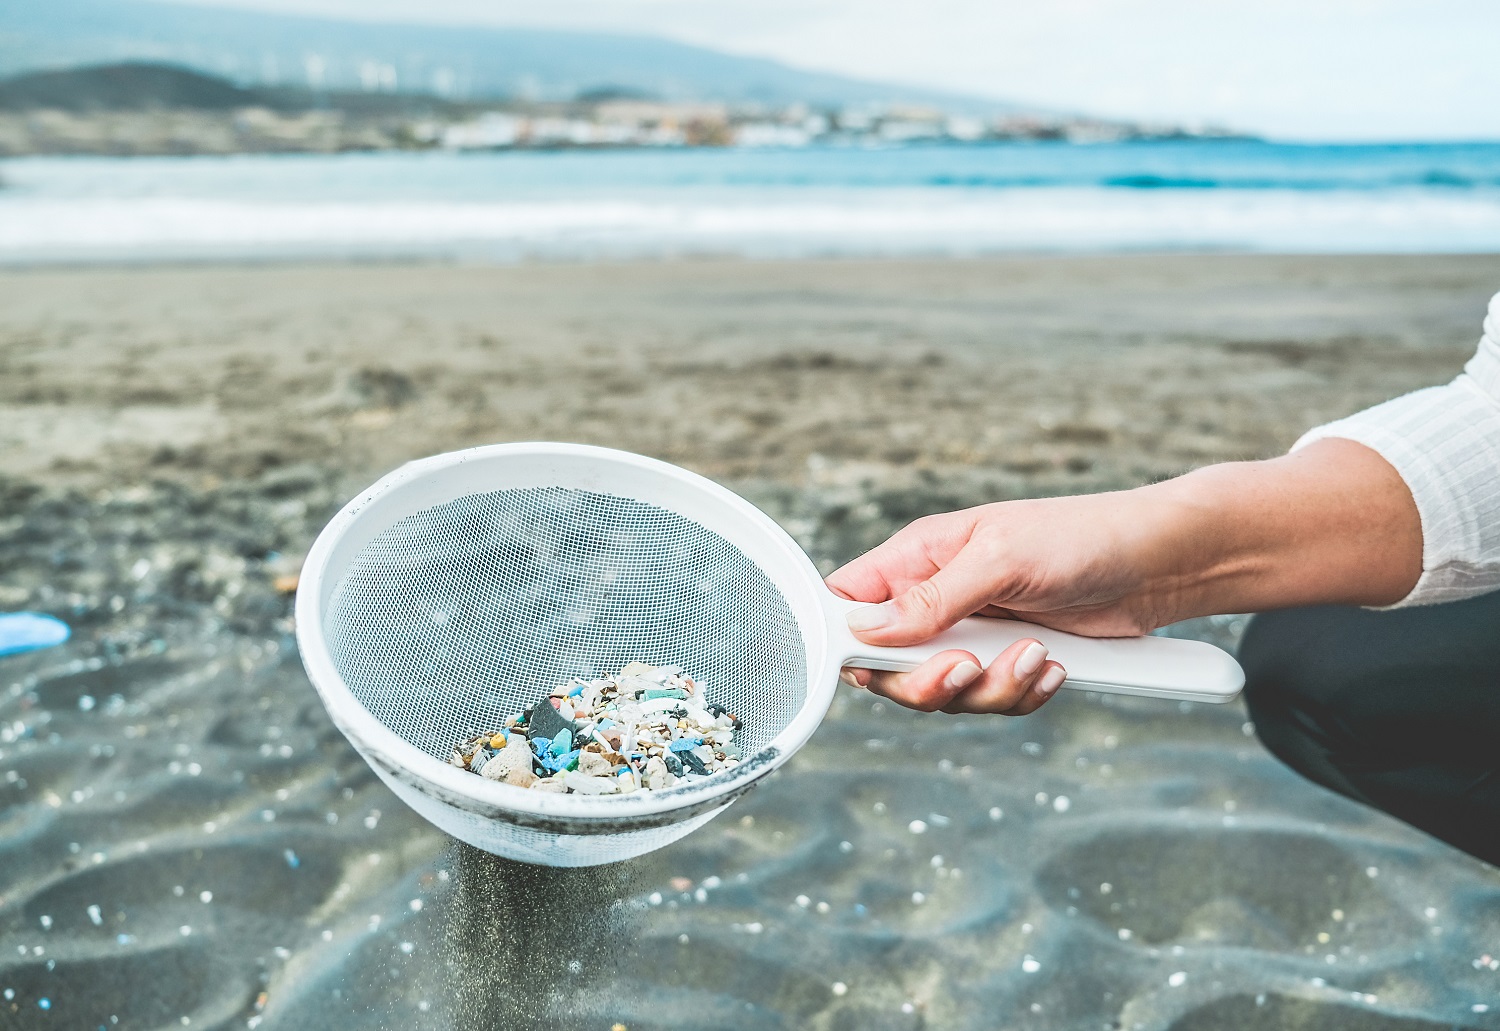 California First in the Nation to Approve Testing Method for Microplastics in Drinking Water